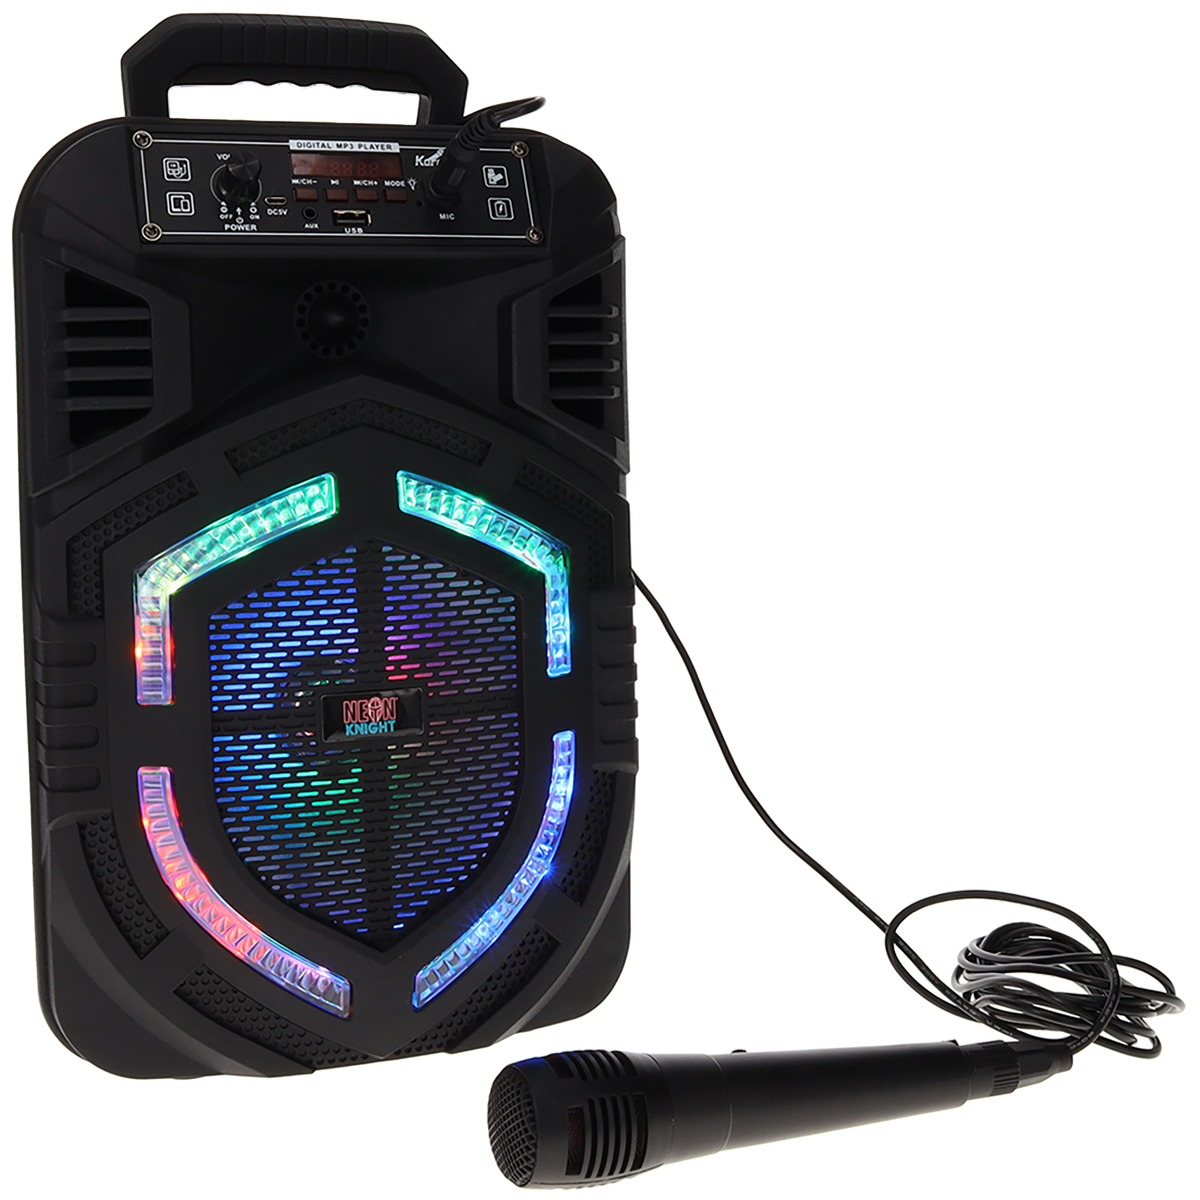 Neon Knight 8 inch Tailgate Bluetooth Speaker Portable Speaker with Microphone NKTG